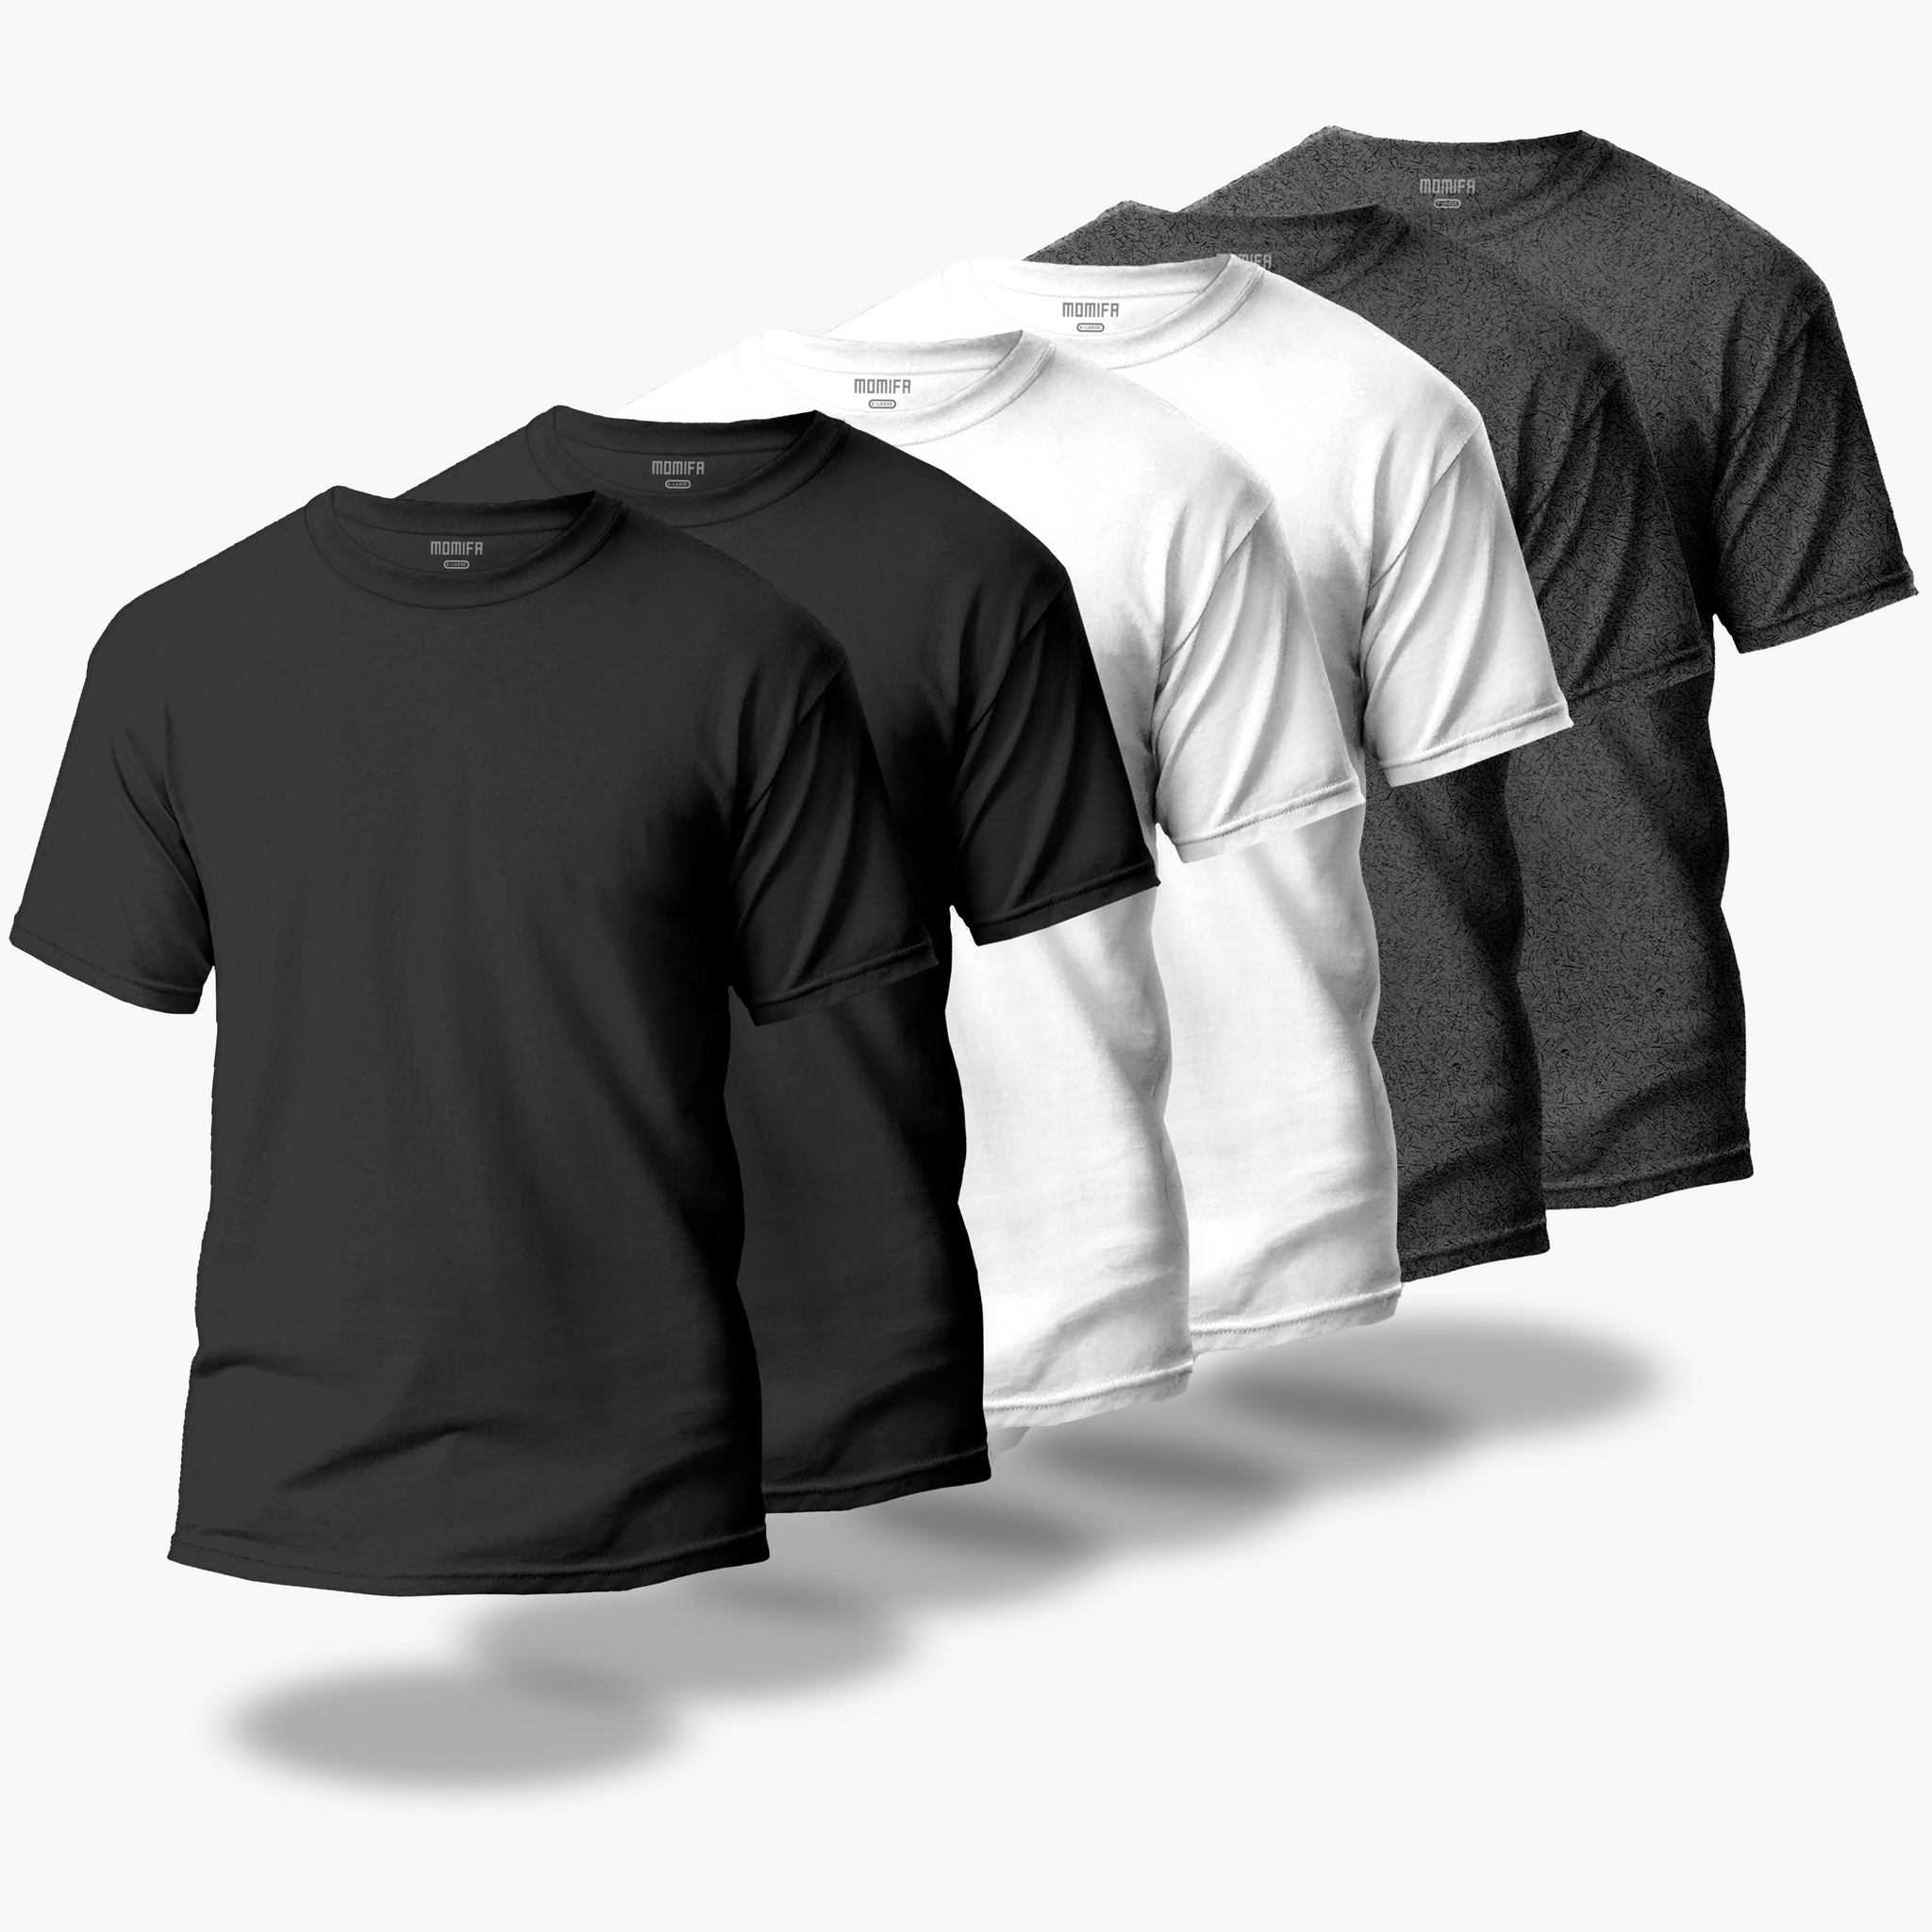 We produce high quality fitted premium plain t shirts for everyone. Modern Minimal Fashion - MOMIFA. Buy over 50$ and get free delivery. You're in good hands enjoy the deal now!